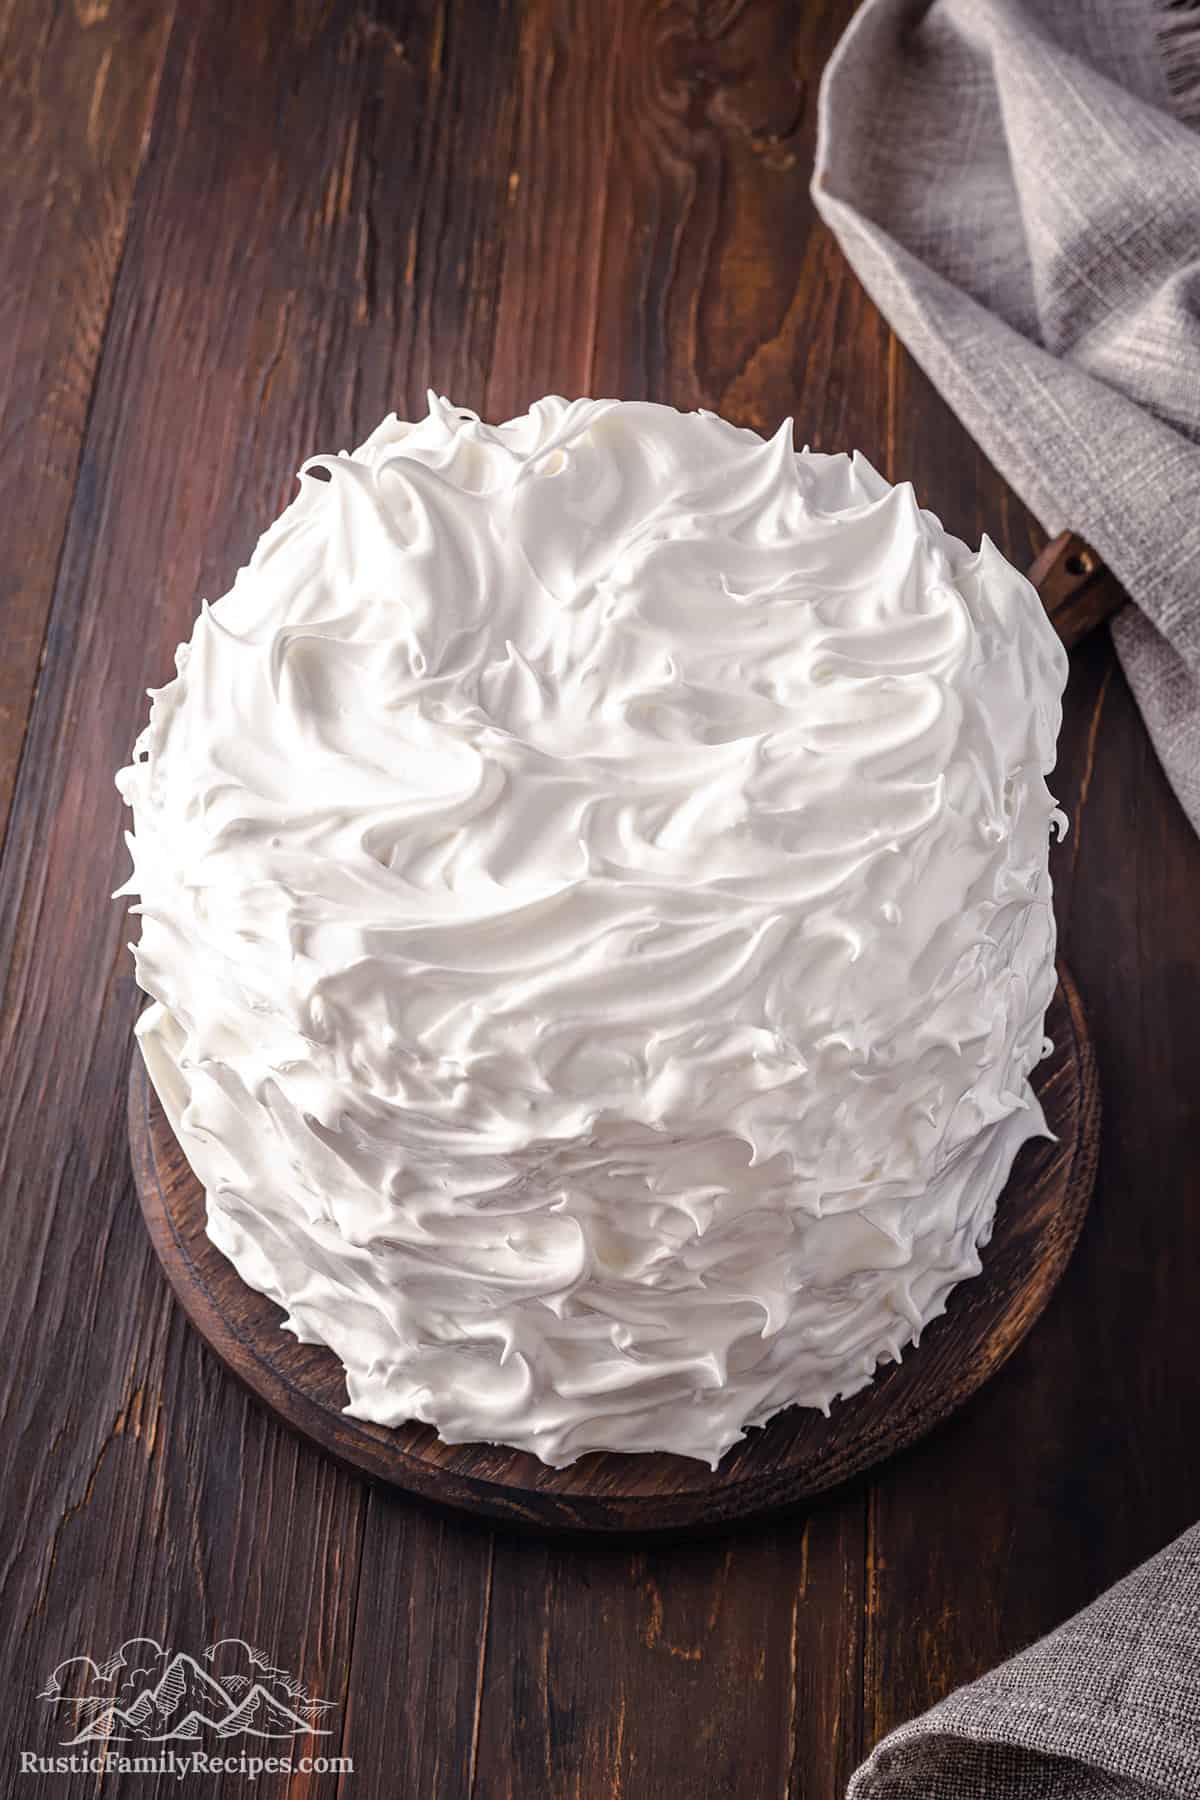 Assembled cake coated with marshmallow frosting swirls.